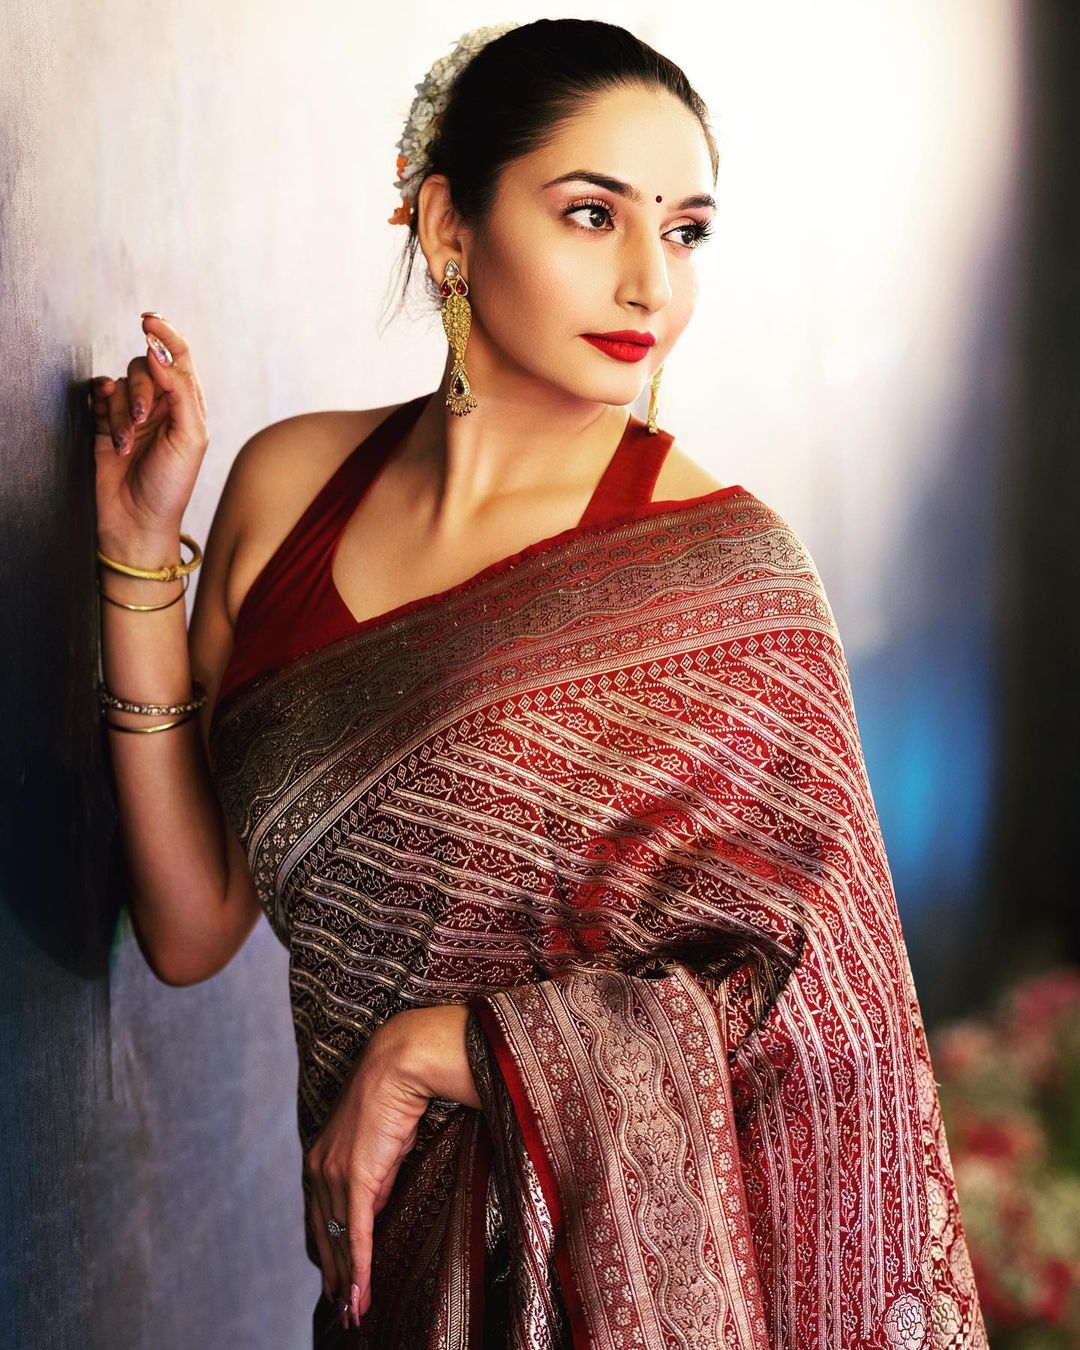 Actress ragini dwivedi melts our hearts with her classy looks-Actressragini, Ragini Dwivedi, Raginidwivedi Photos,Spicy Hot Pics,Images,High Resolution WallPapers Download